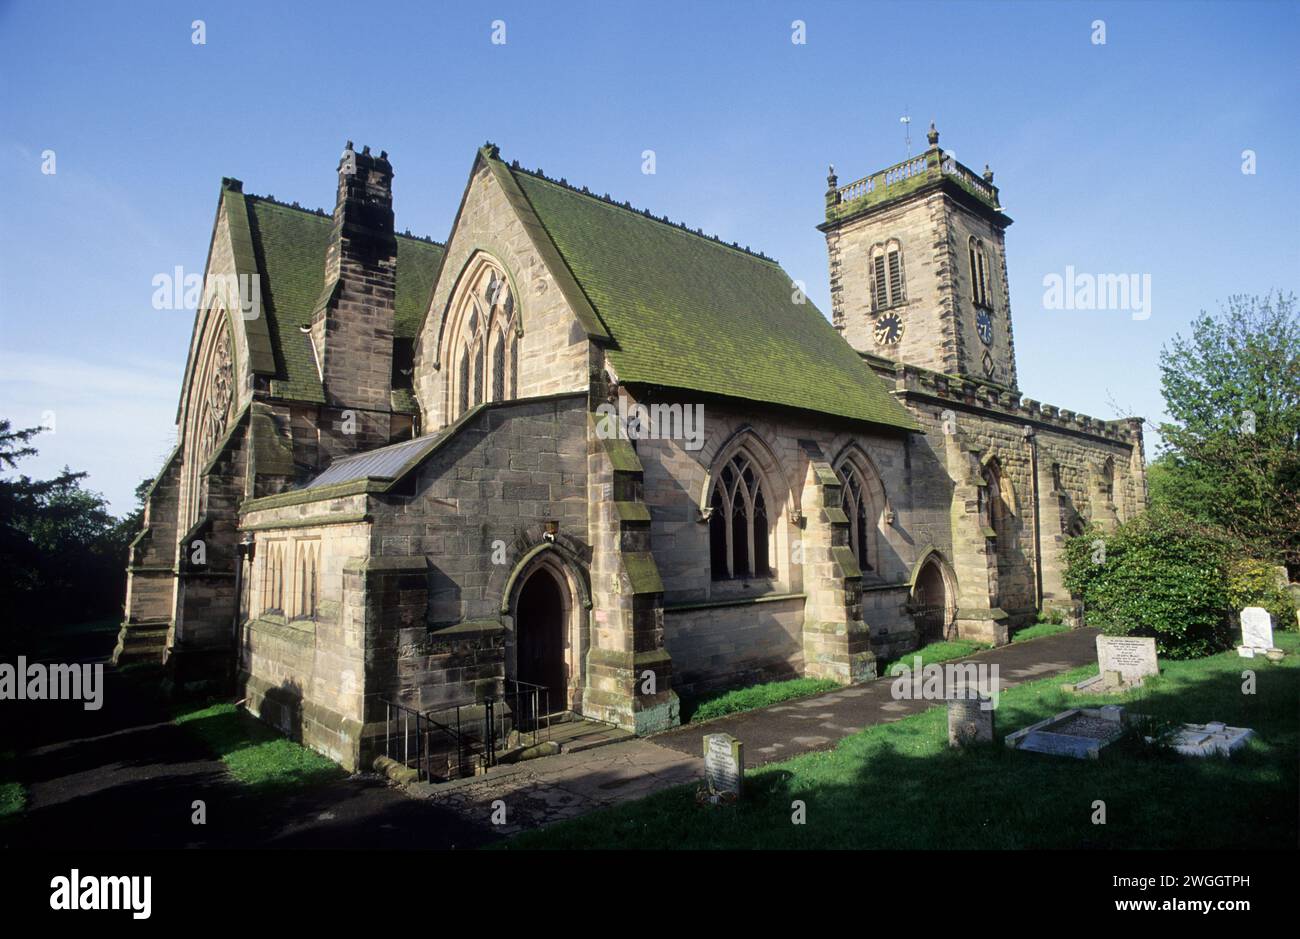 UK, Staffordshire, Abbots Bromley, classic English country church. Stock Photo